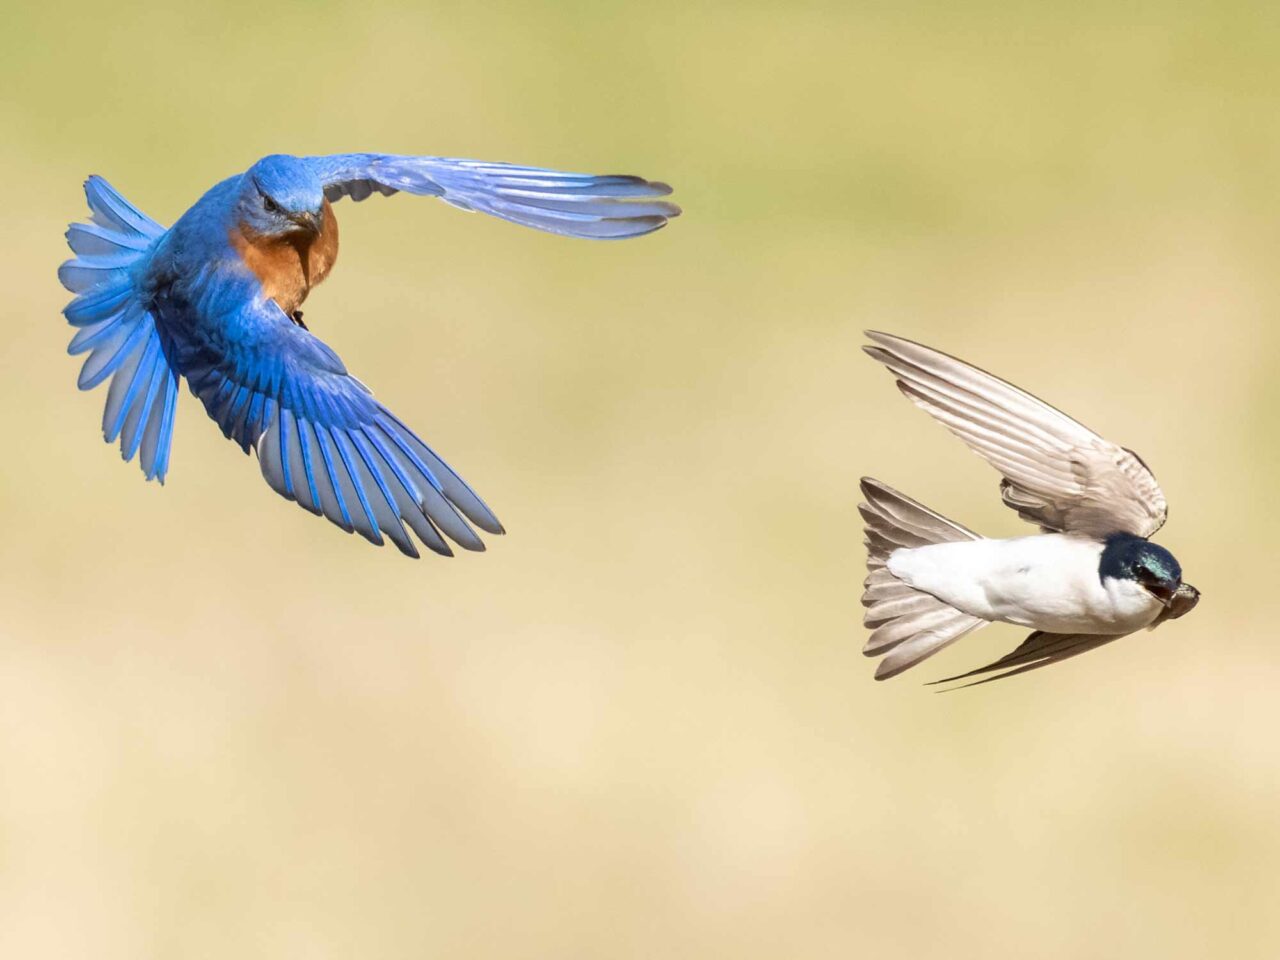 A blue bird chases another white and iridescent blue bird.